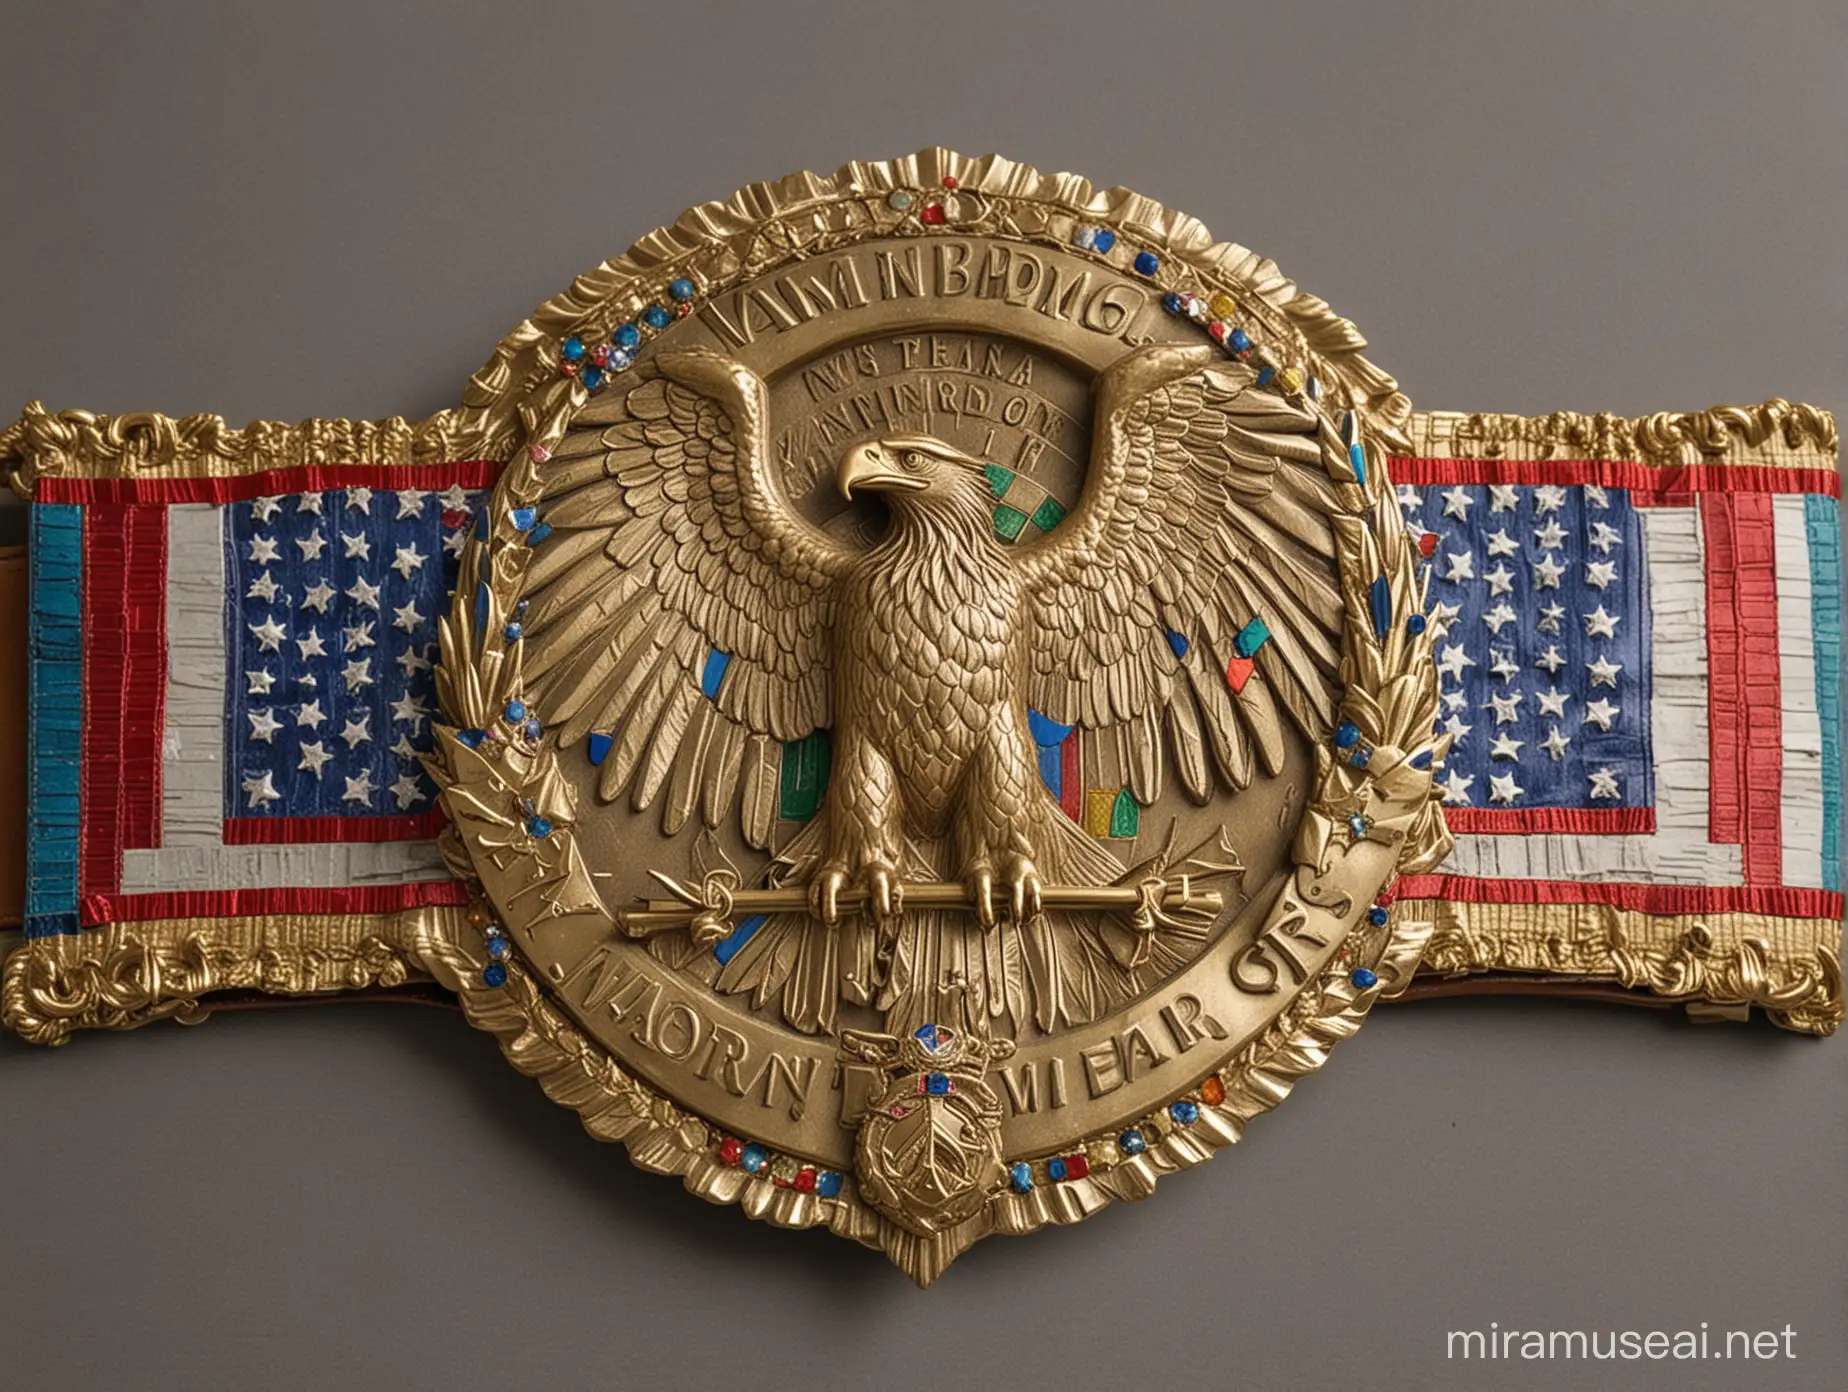 RainbowColored Wrestling Champions Belt with Golden Eagle Plaque Featuring Statue of Liberty and American Flag Motifs